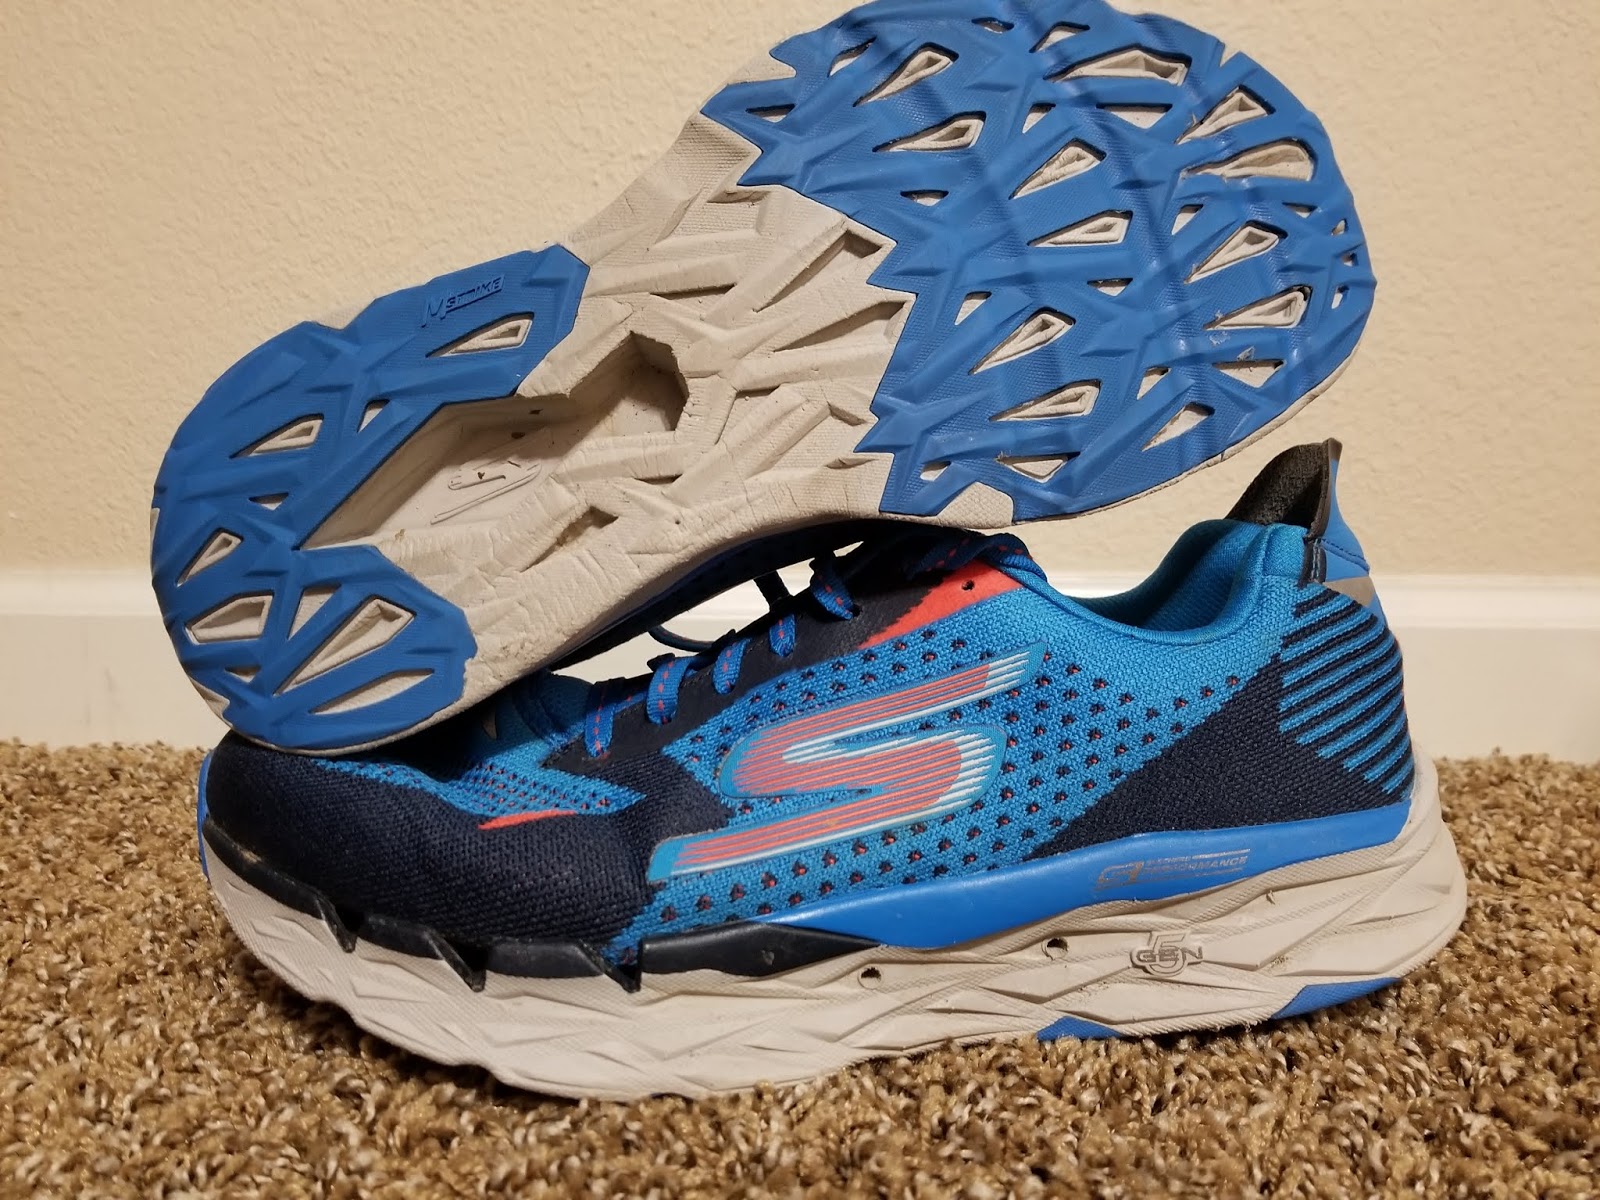 Running Without Injuries: Skechers Ultra Road Review